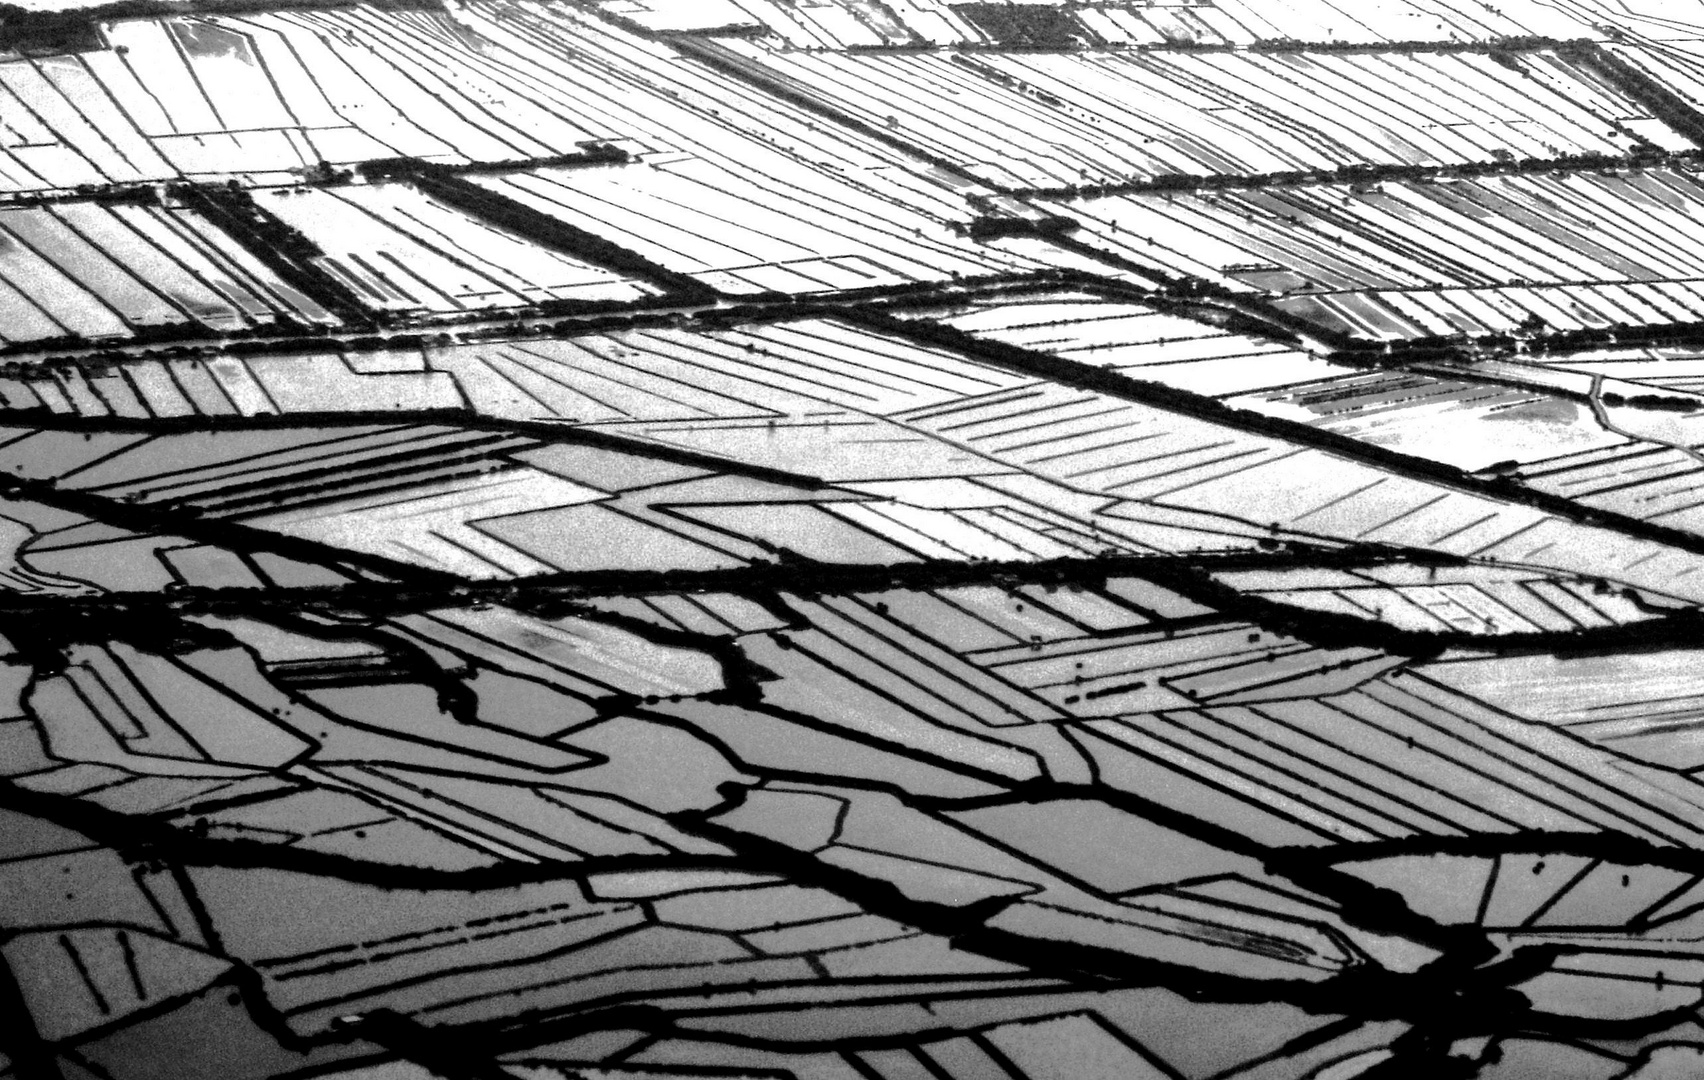 Chess of ricefield